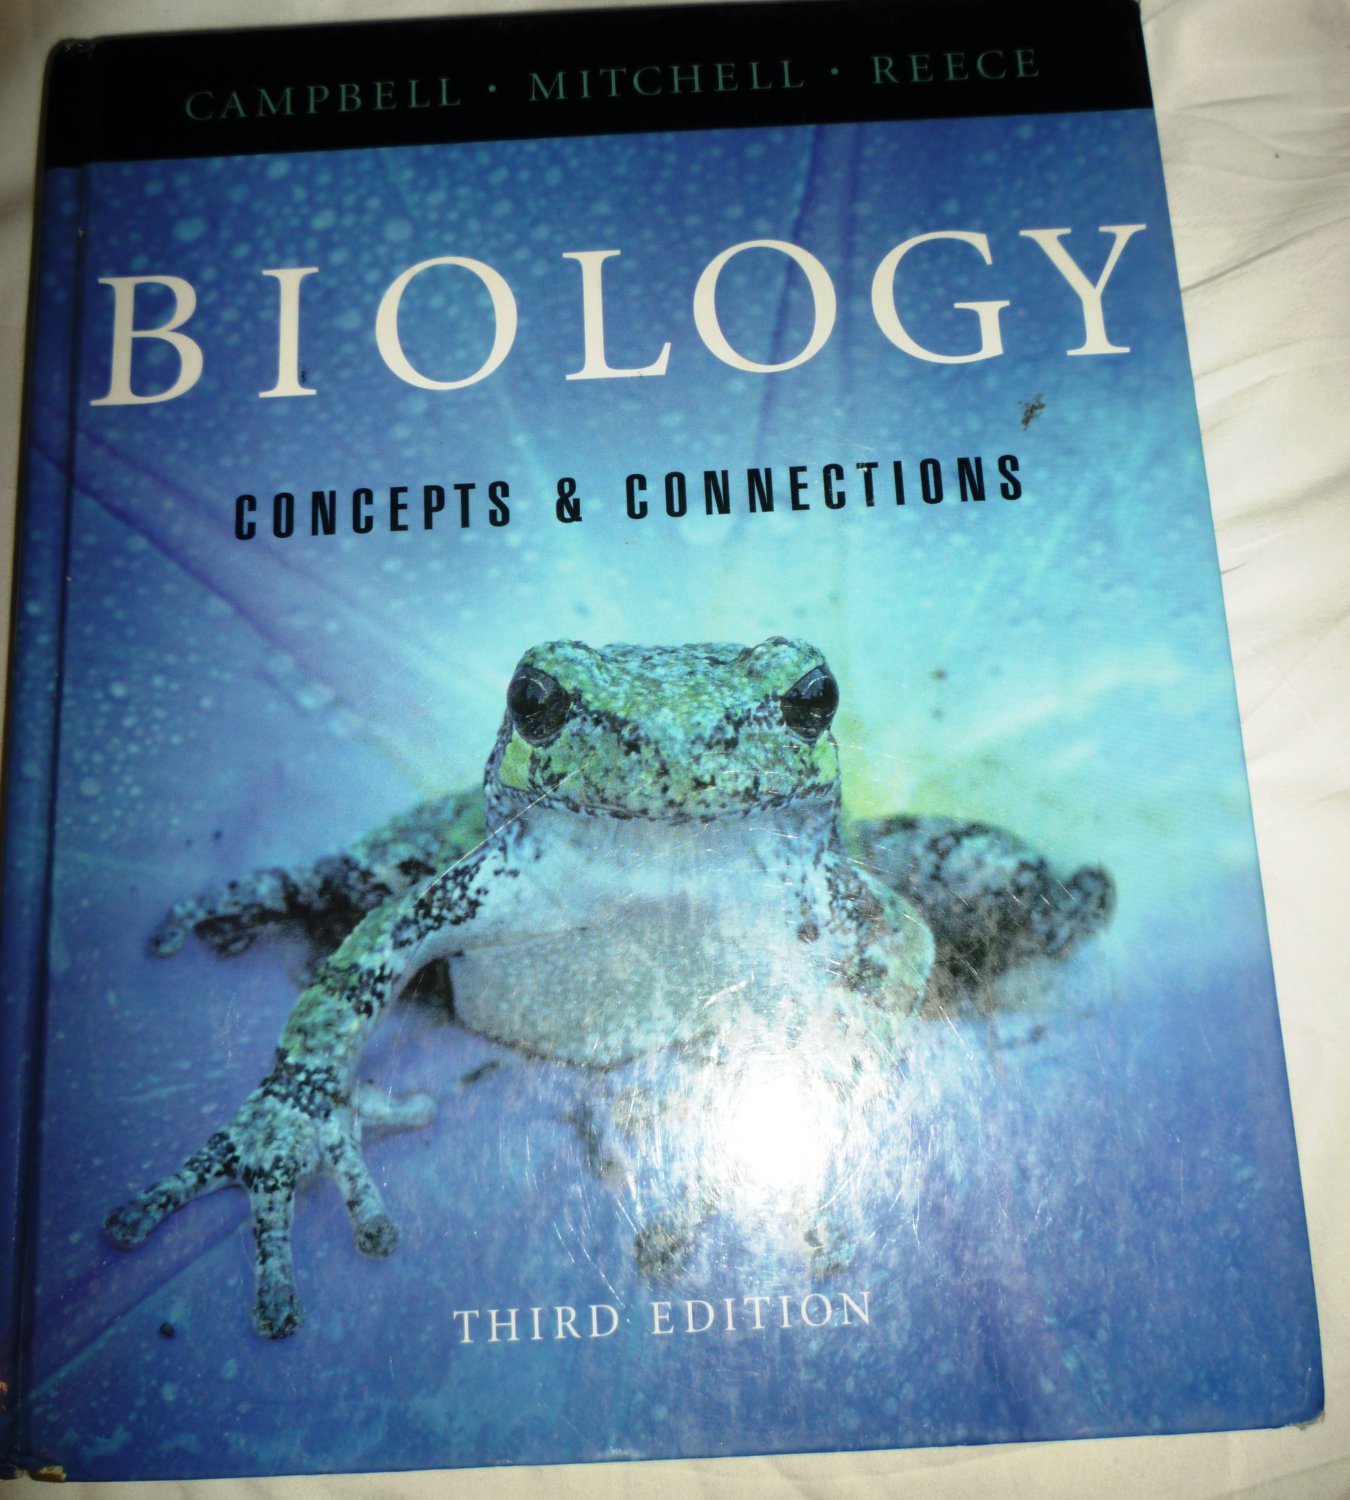 biology-concepts-connections-third-edition-campbell-mitchell-reece